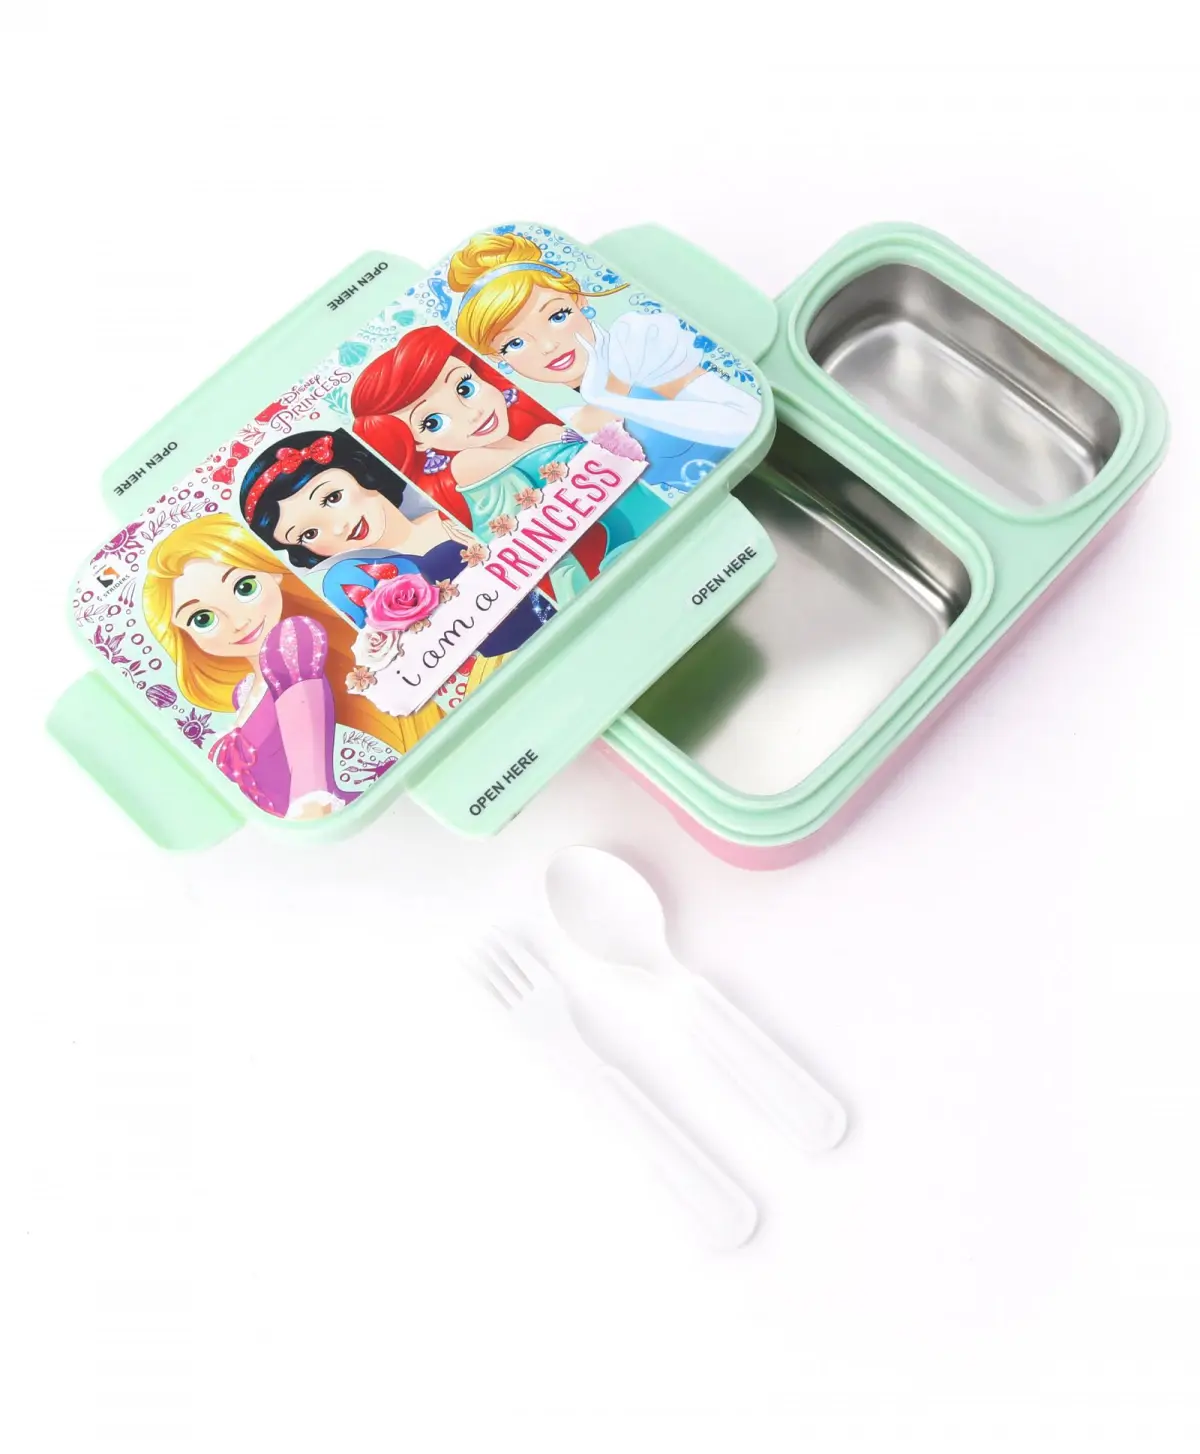 Striders Magical Disney Princess Lunch Box Perfect for Little Royalty, 3Y+, Multicolour